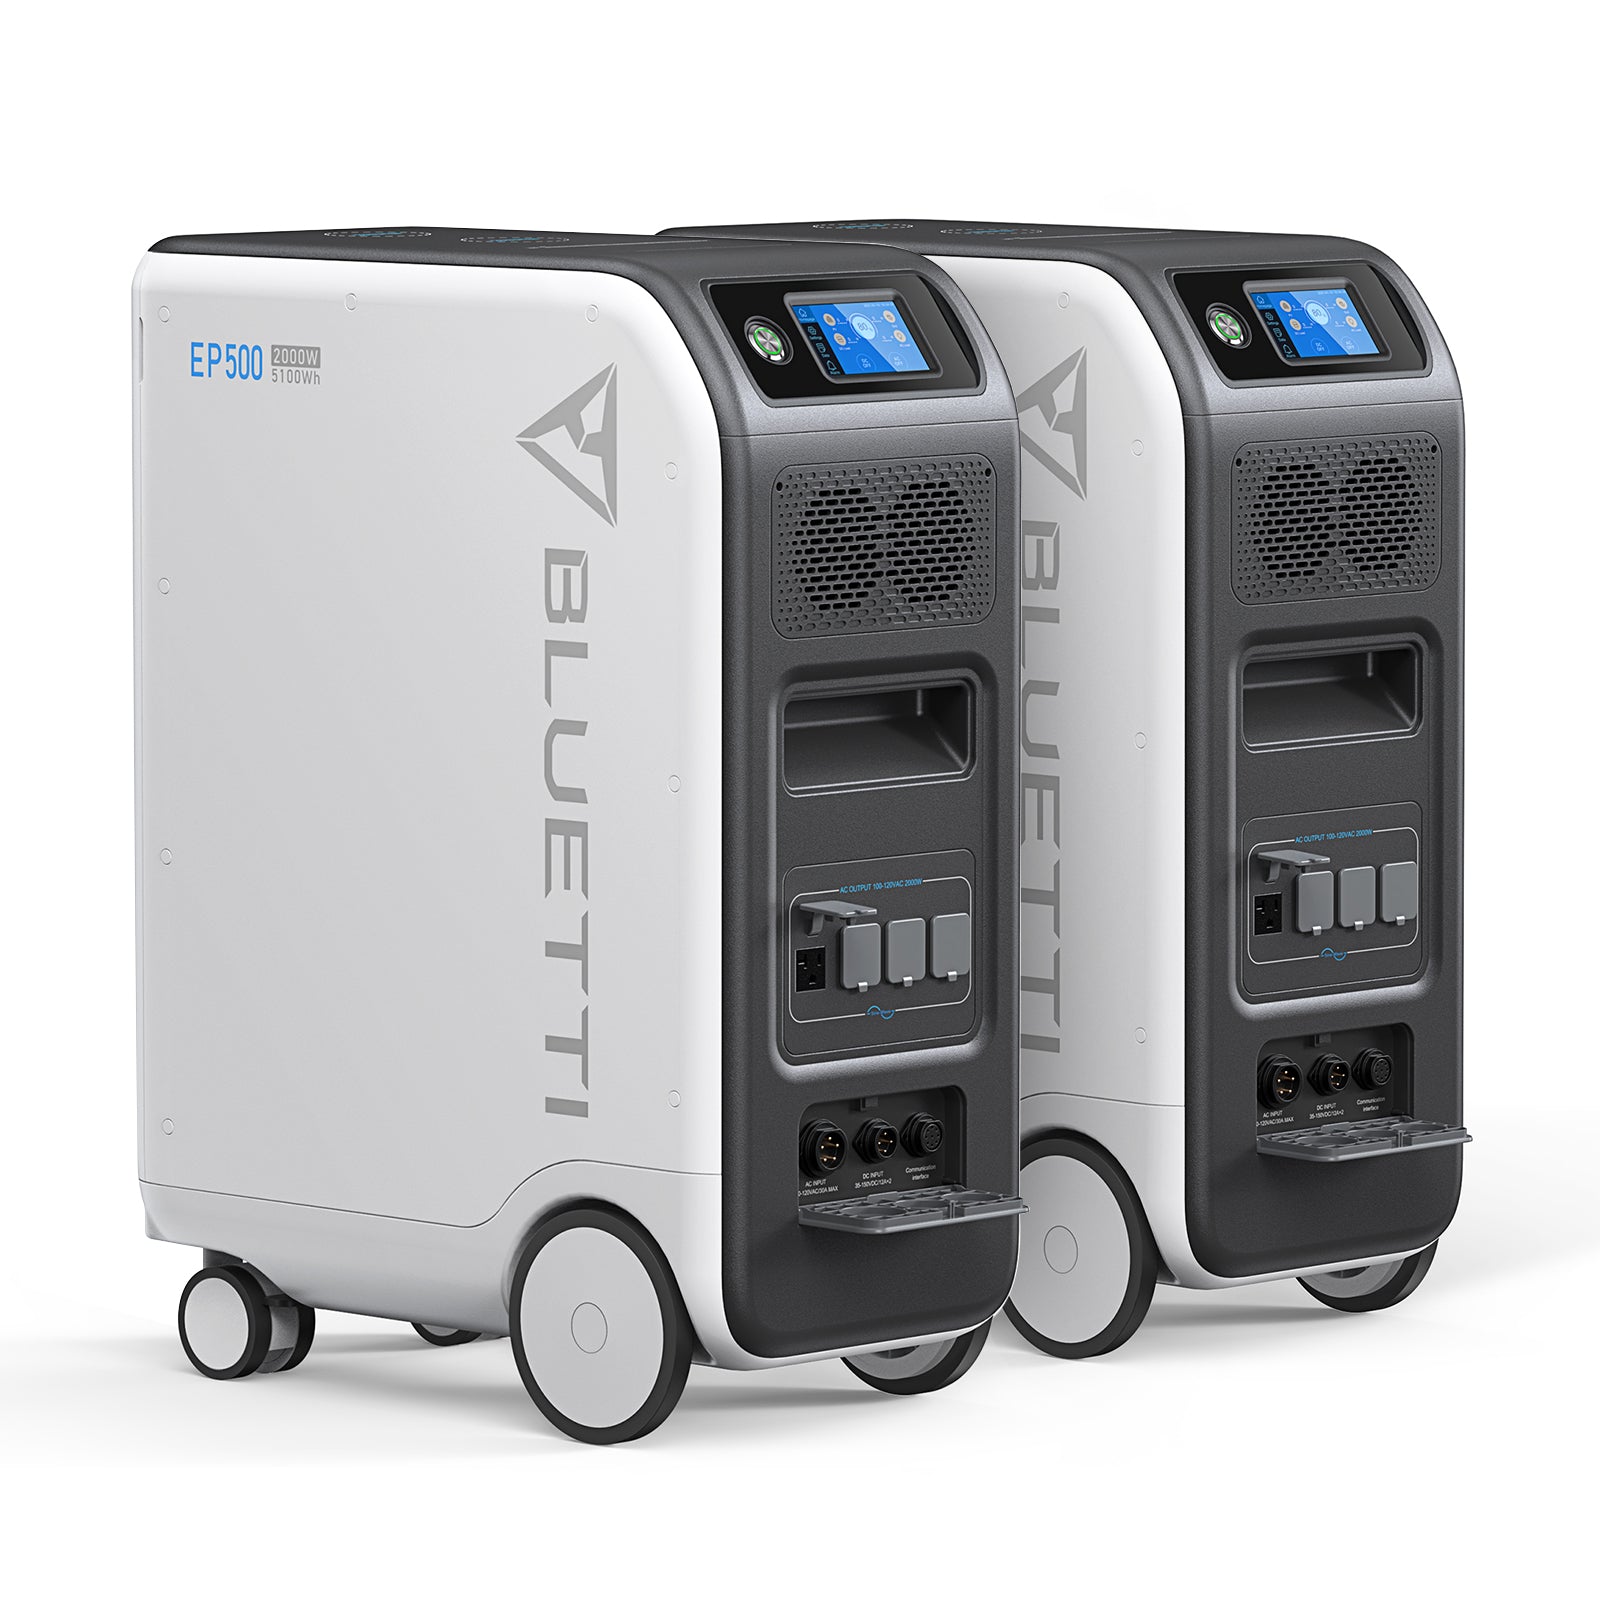 BLUETTI EP500 Backup Home Energy Storage System 2*EP500 / 4000W, 10200Wh Power Station